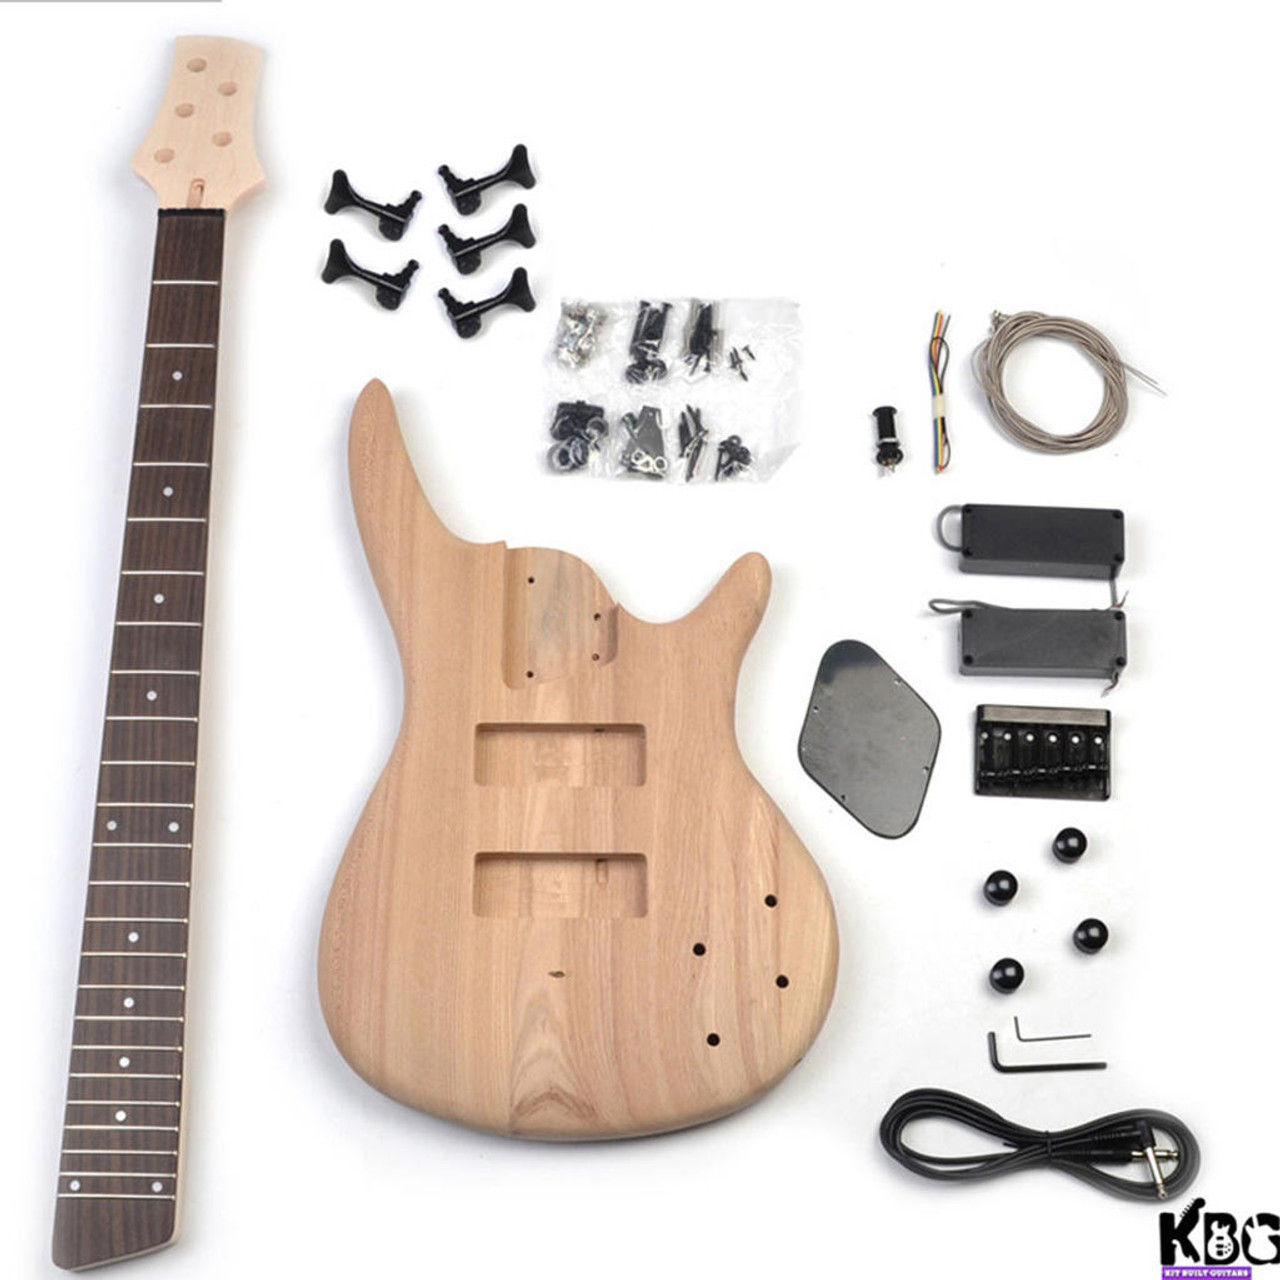 DIY 5 String Bass Kit SR Style Build Your Own Bass Guitar